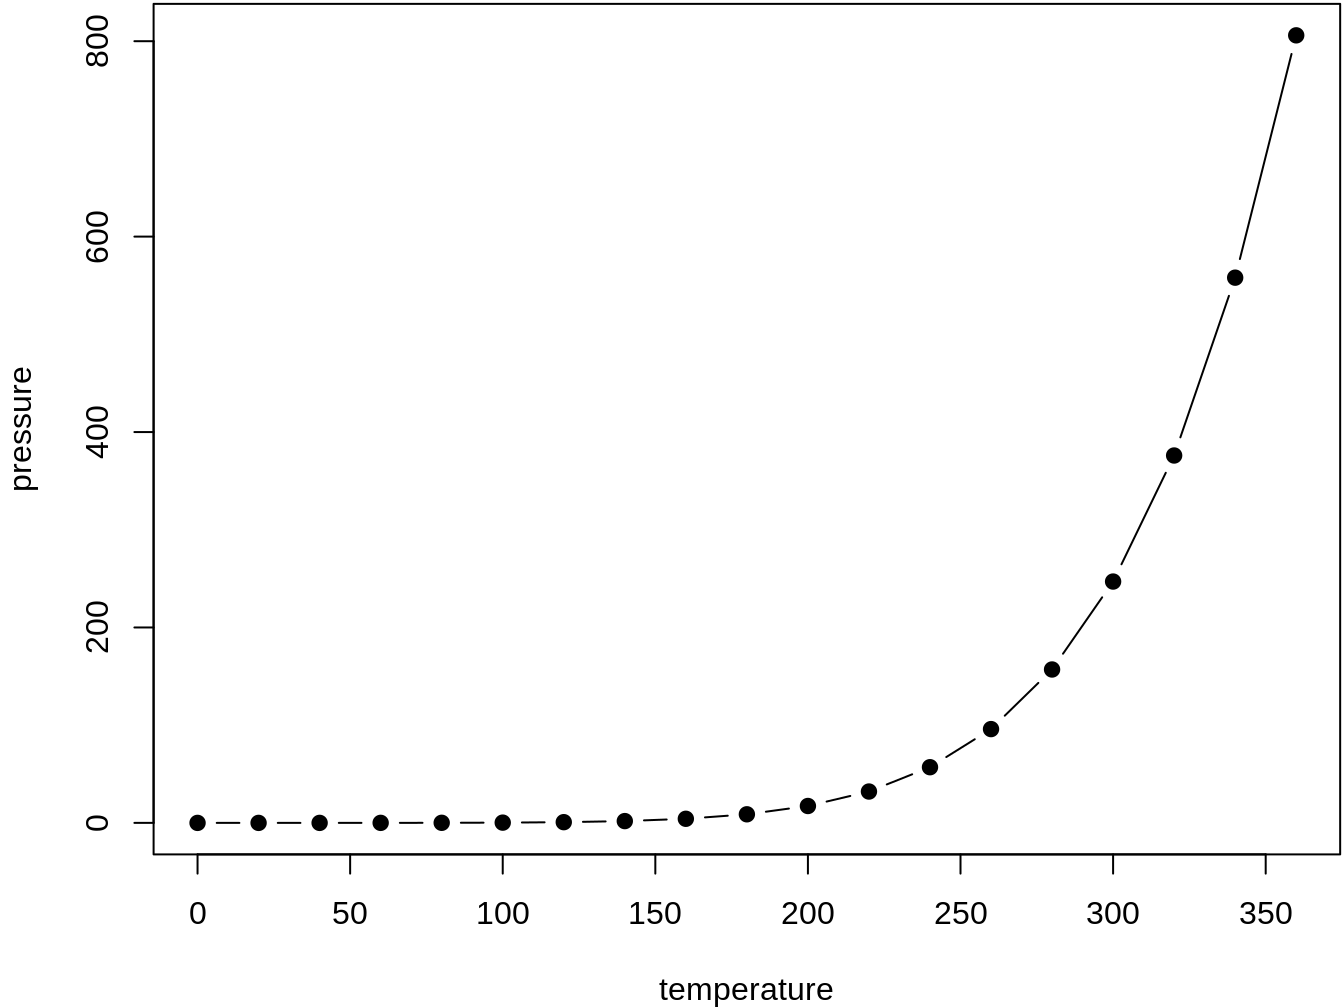 Plot with connected points showing that vapor pressure of mercury increases exponentially as temperature increases.